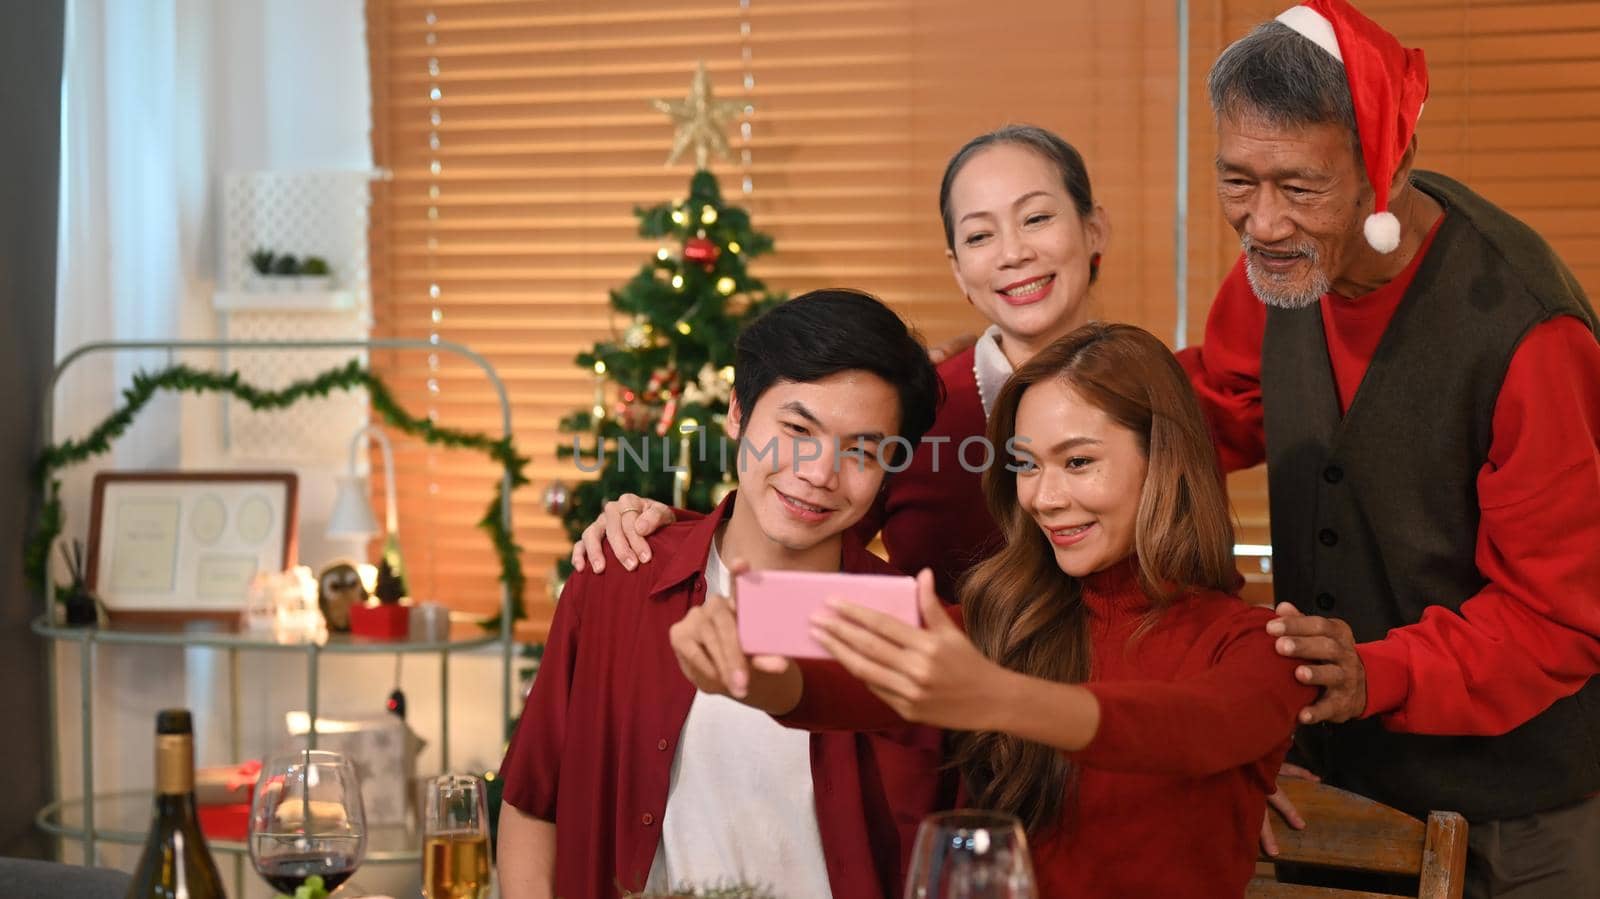 Image of happy family celebrating Christmas together at home lighted with soft lights and candles. Celebration, holidays and people concept by prathanchorruangsak